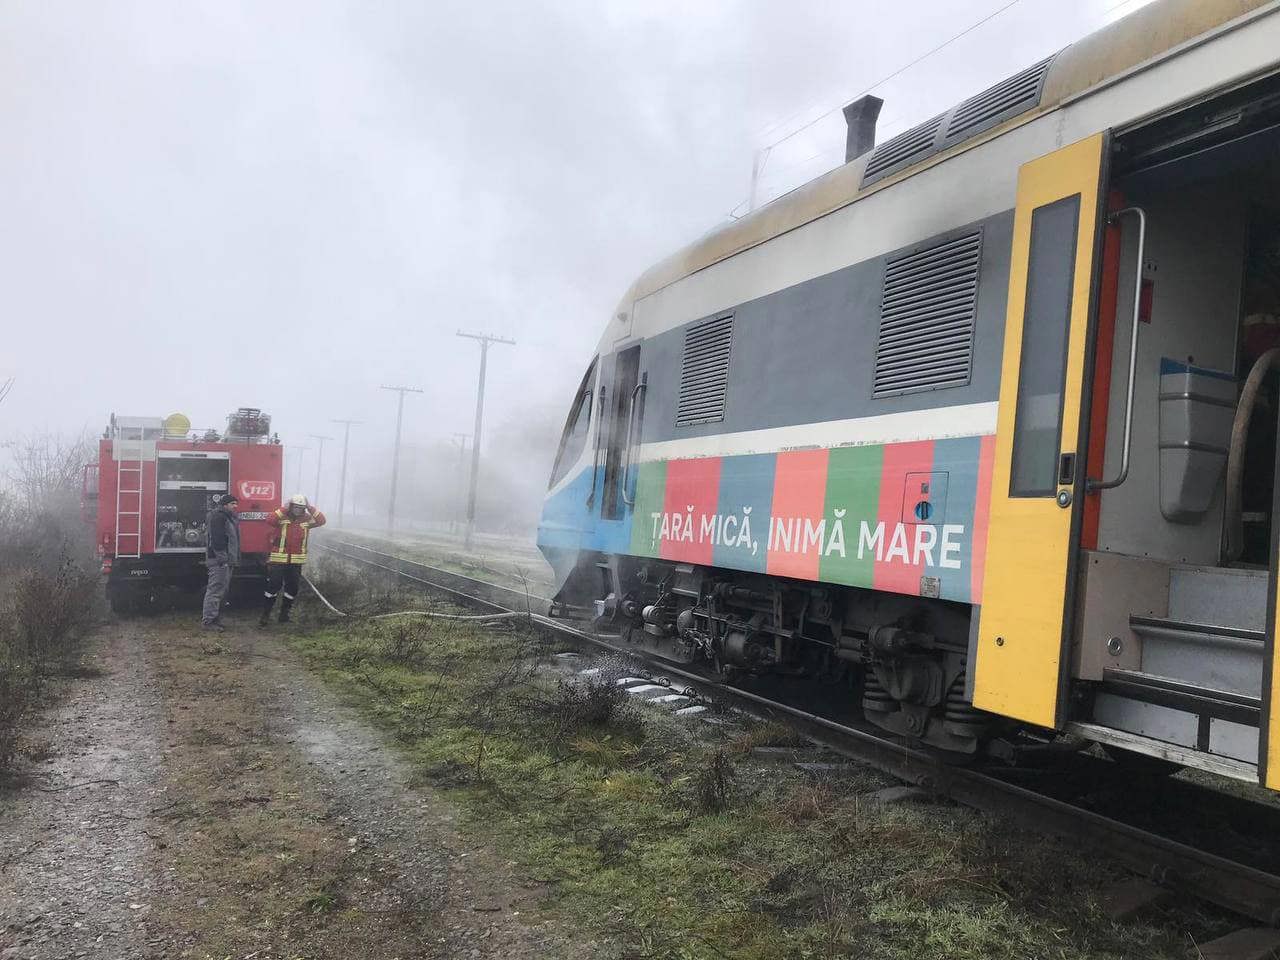 The train running on the route Chisinau – Iași in flames. 70 people evacuated